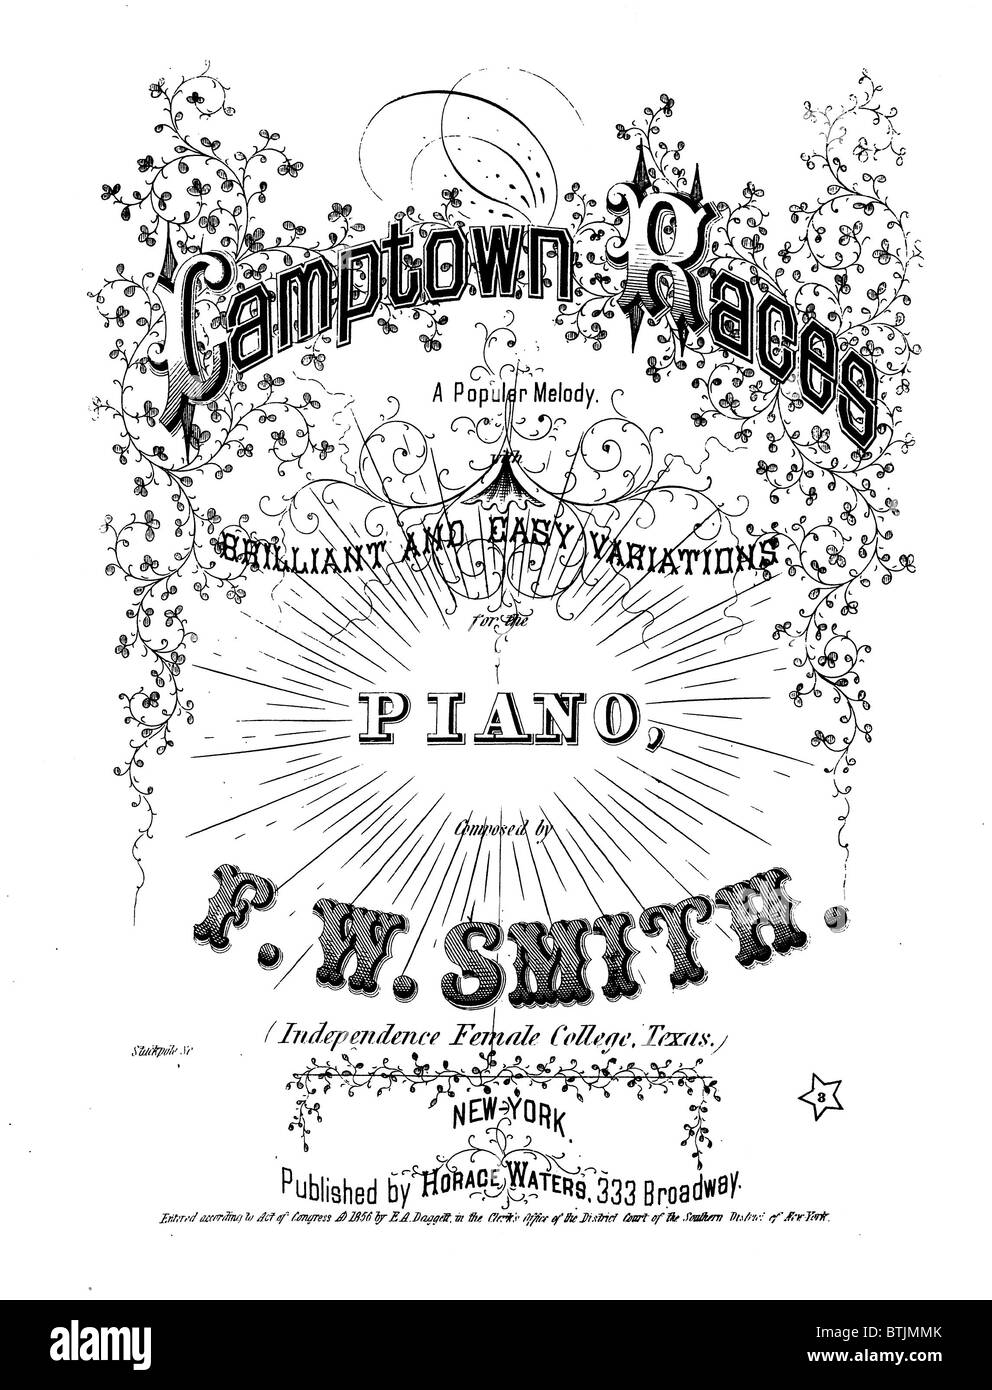 Camptown Races, by F.W. Smith, sheet music title page, 1856. Stock Photo